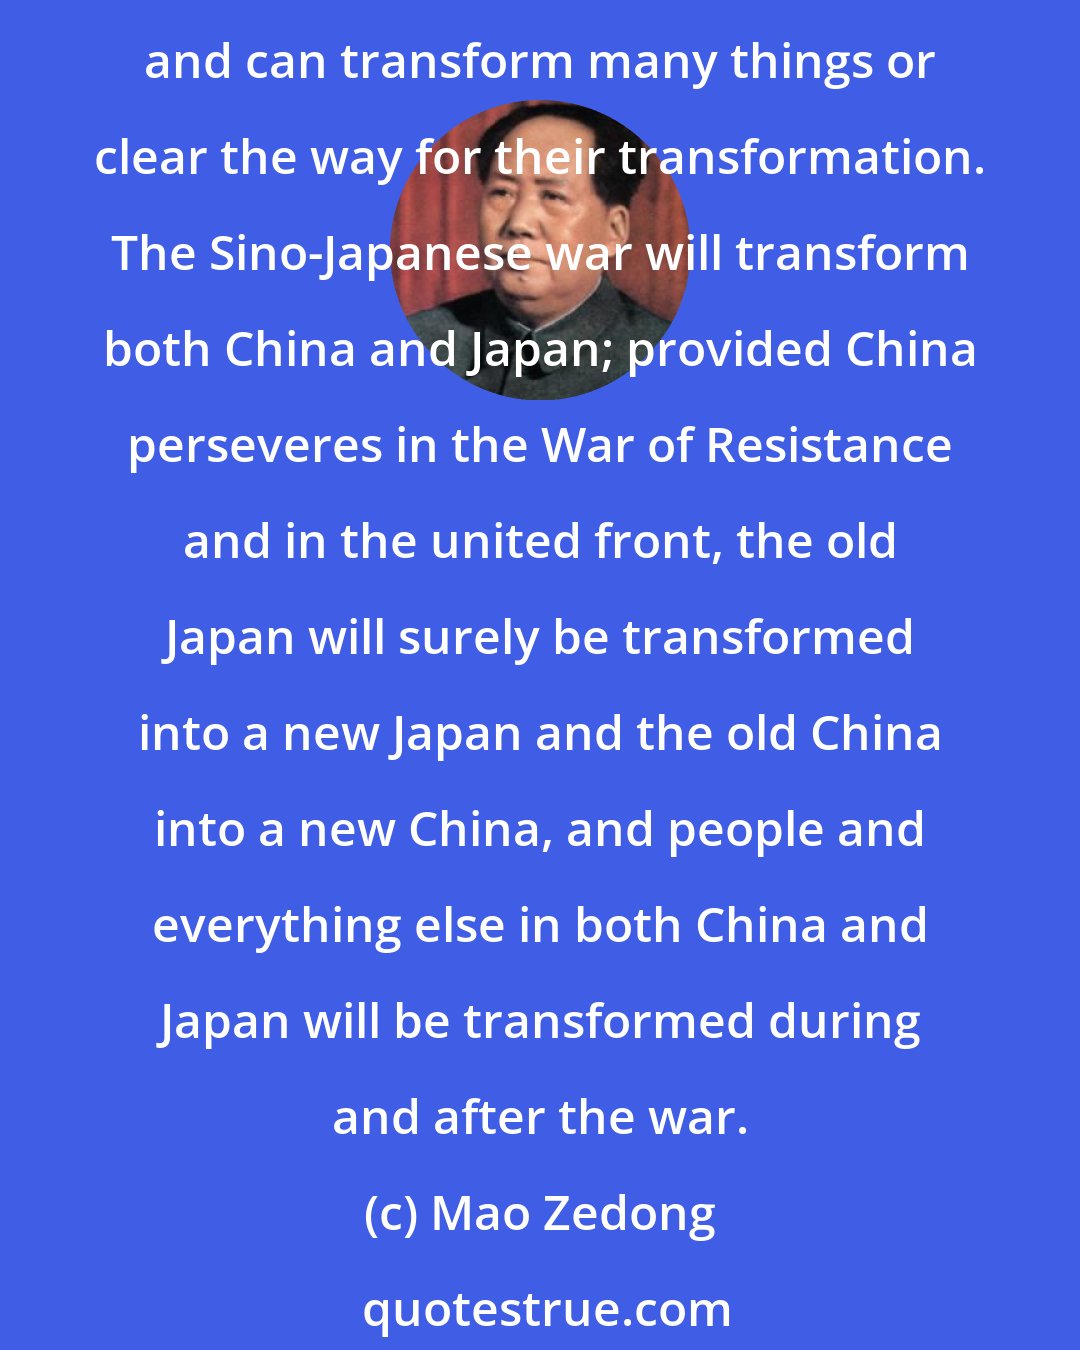 Mao Zedong: Revolutionary war is an antitoxin that not only eliminates the enemy's poison but also purges us of our own filth. Every just, revolutionary war is endowed with tremendous power and can transform many things or clear the way for their transformation. The Sino-Japanese war will transform both China and Japan; provided China perseveres in the War of Resistance and in the united front, the old Japan will surely be transformed into a new Japan and the old China into a new China, and people and everything else in both China and Japan will be transformed during and after the war.